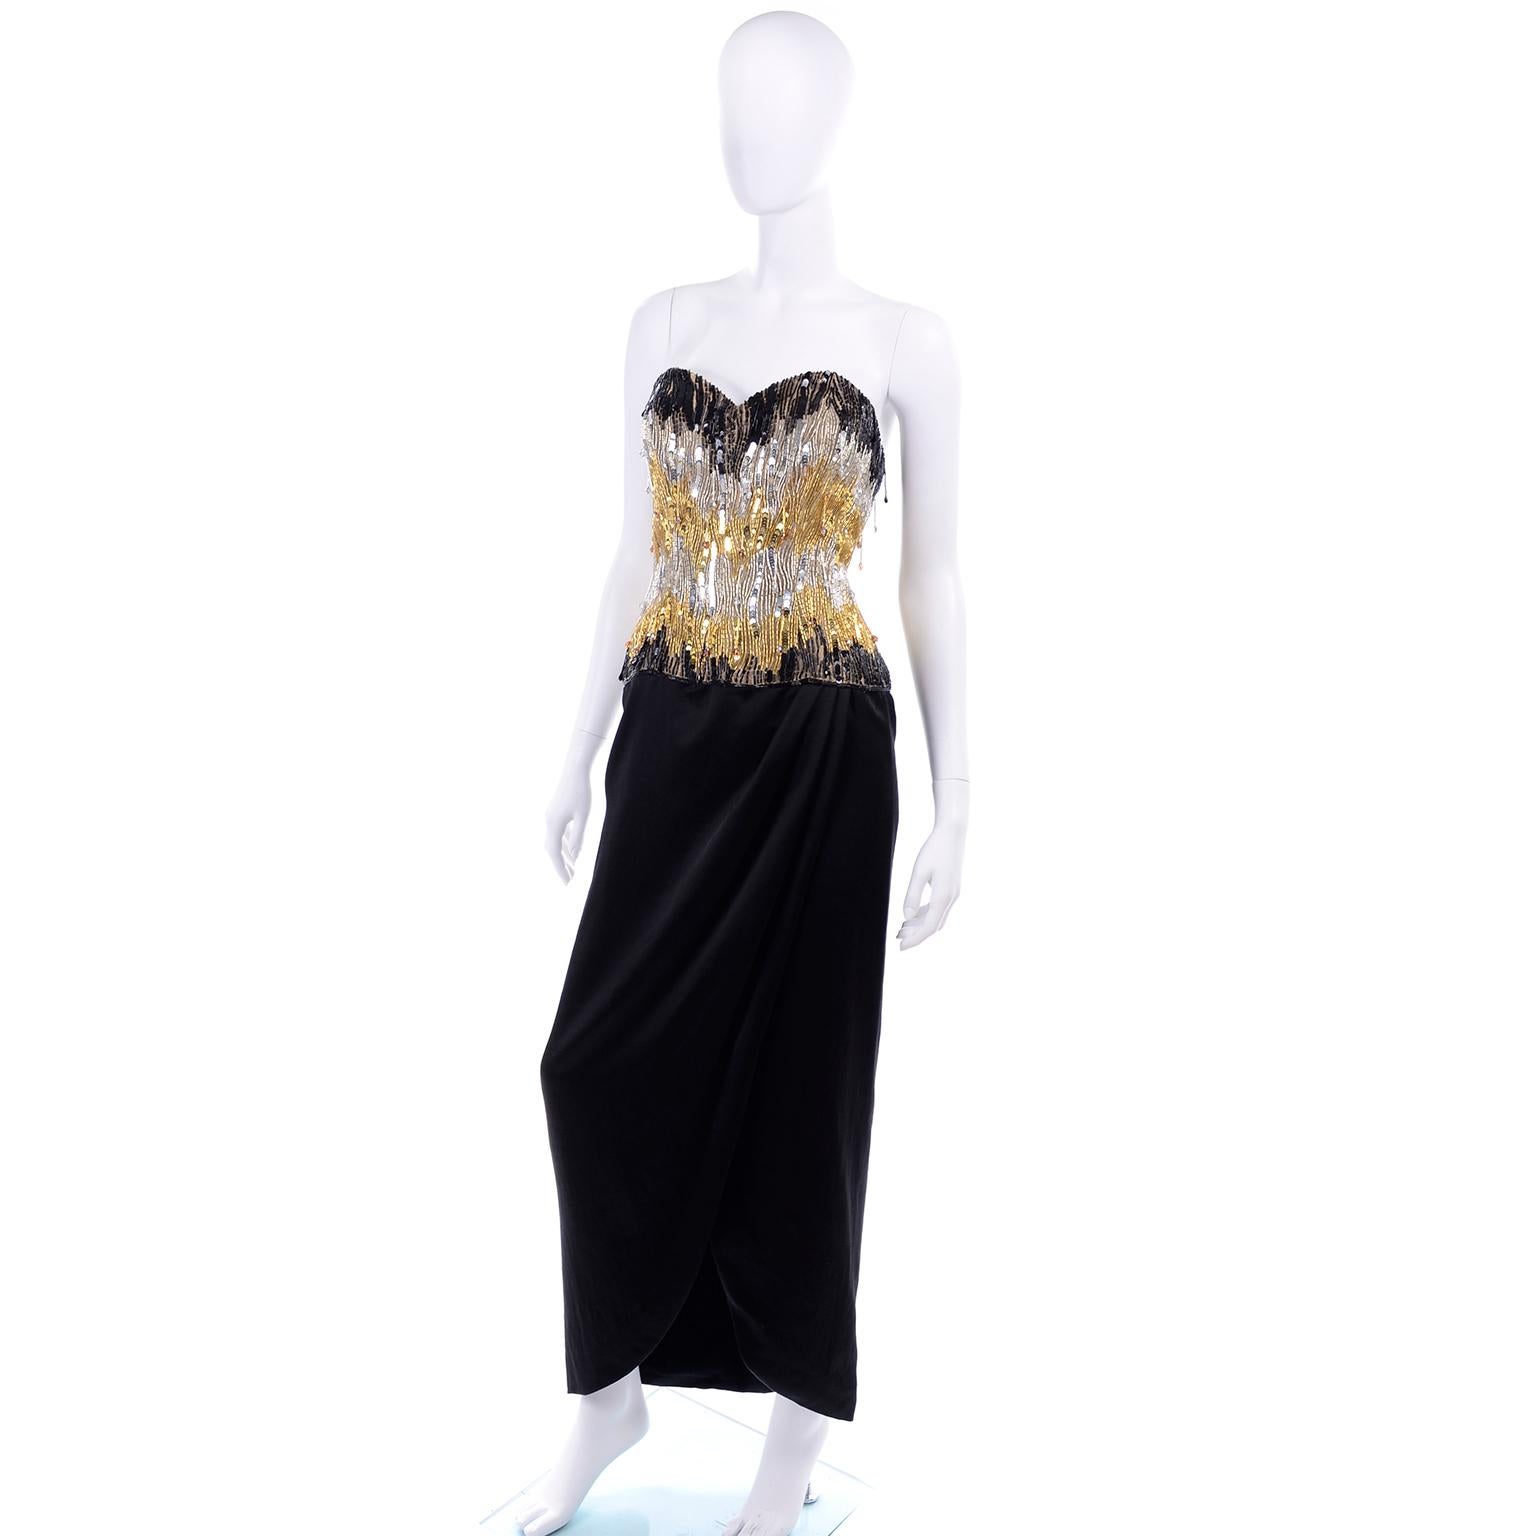 women's black and gold formal dress